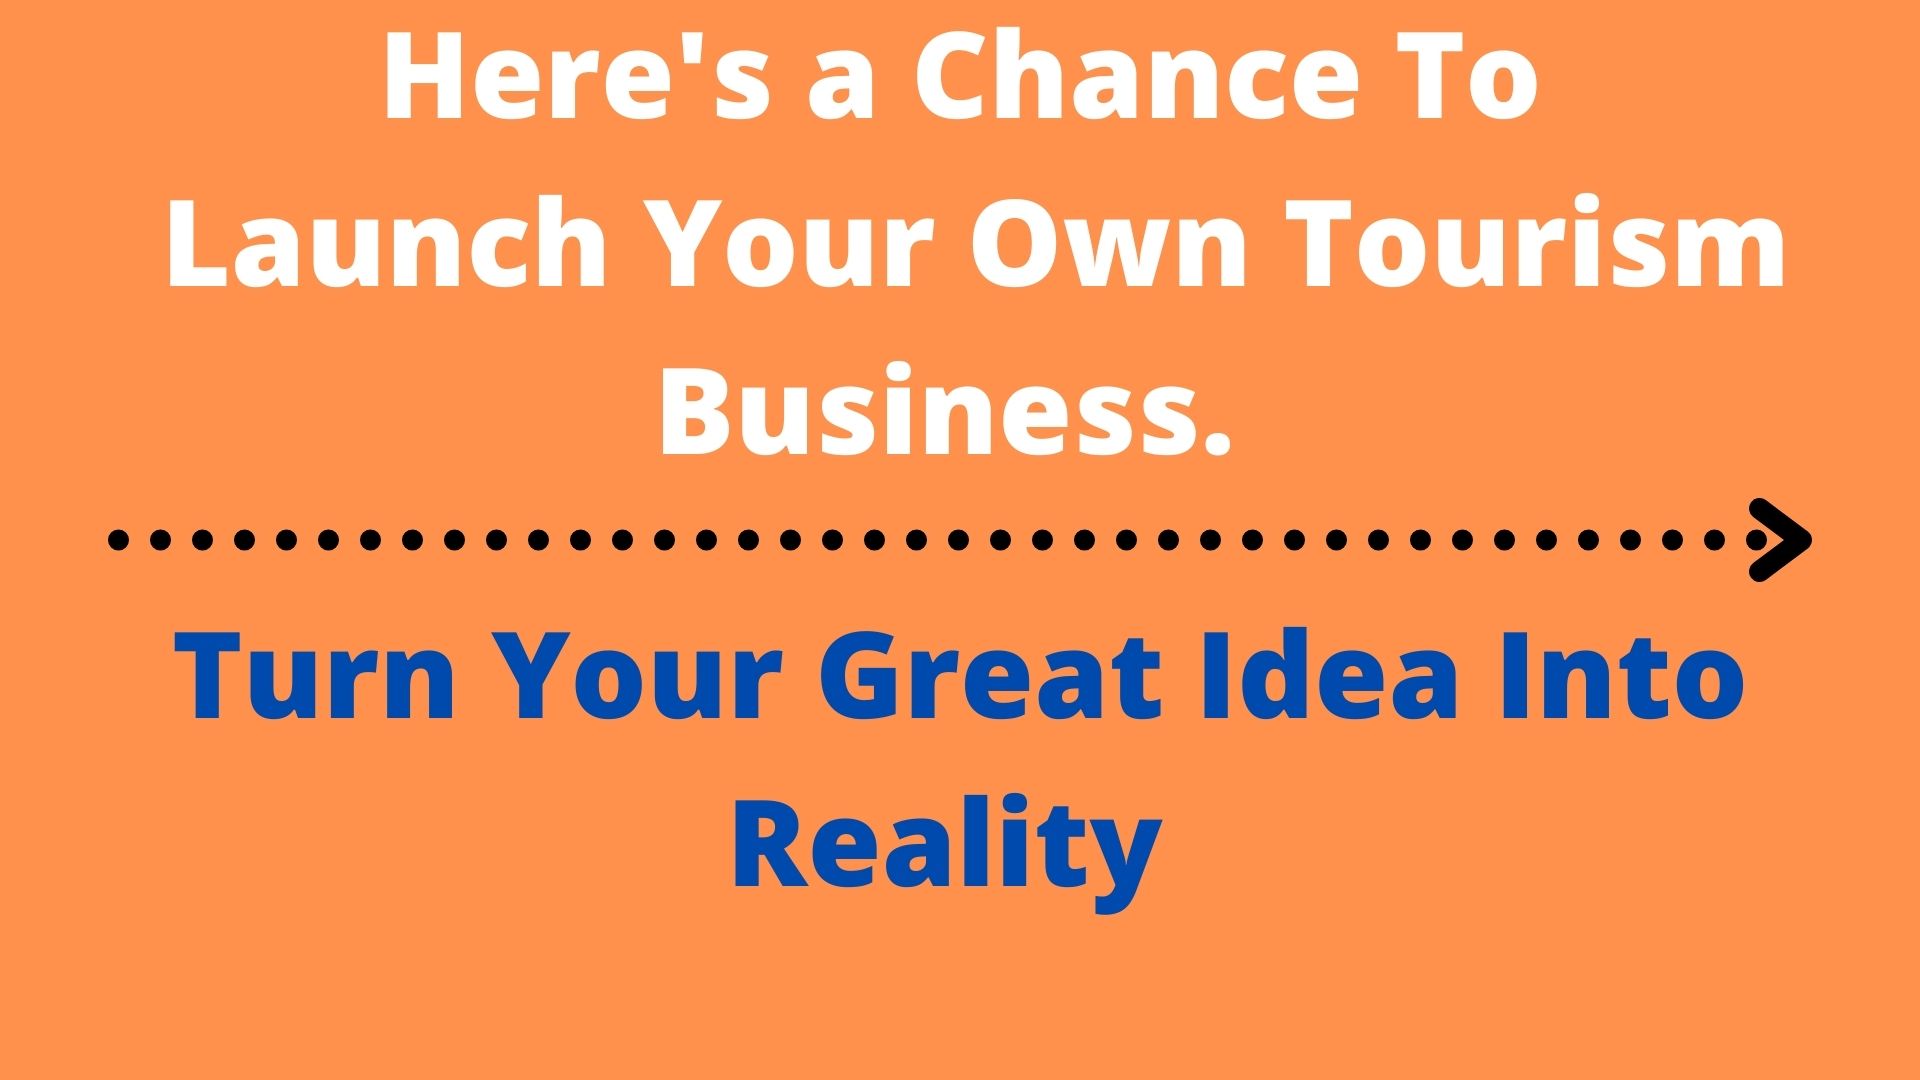 Launching Your Own Tourism Business